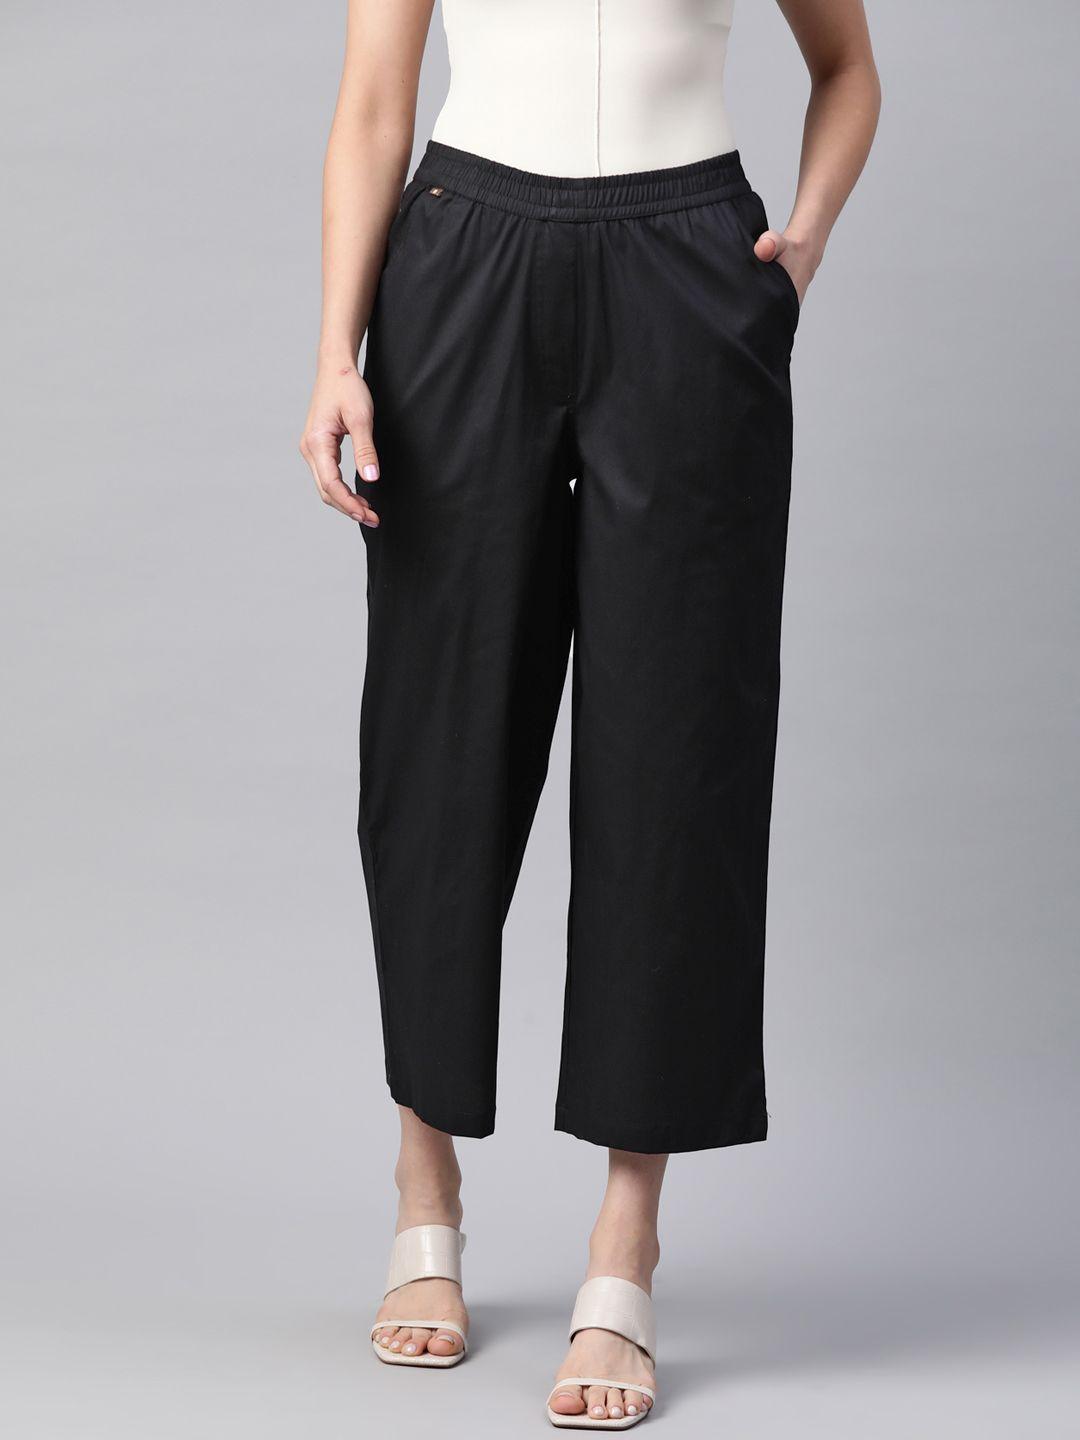 readiprint-fashions-straight-fit-high-rise-culottes-trousers